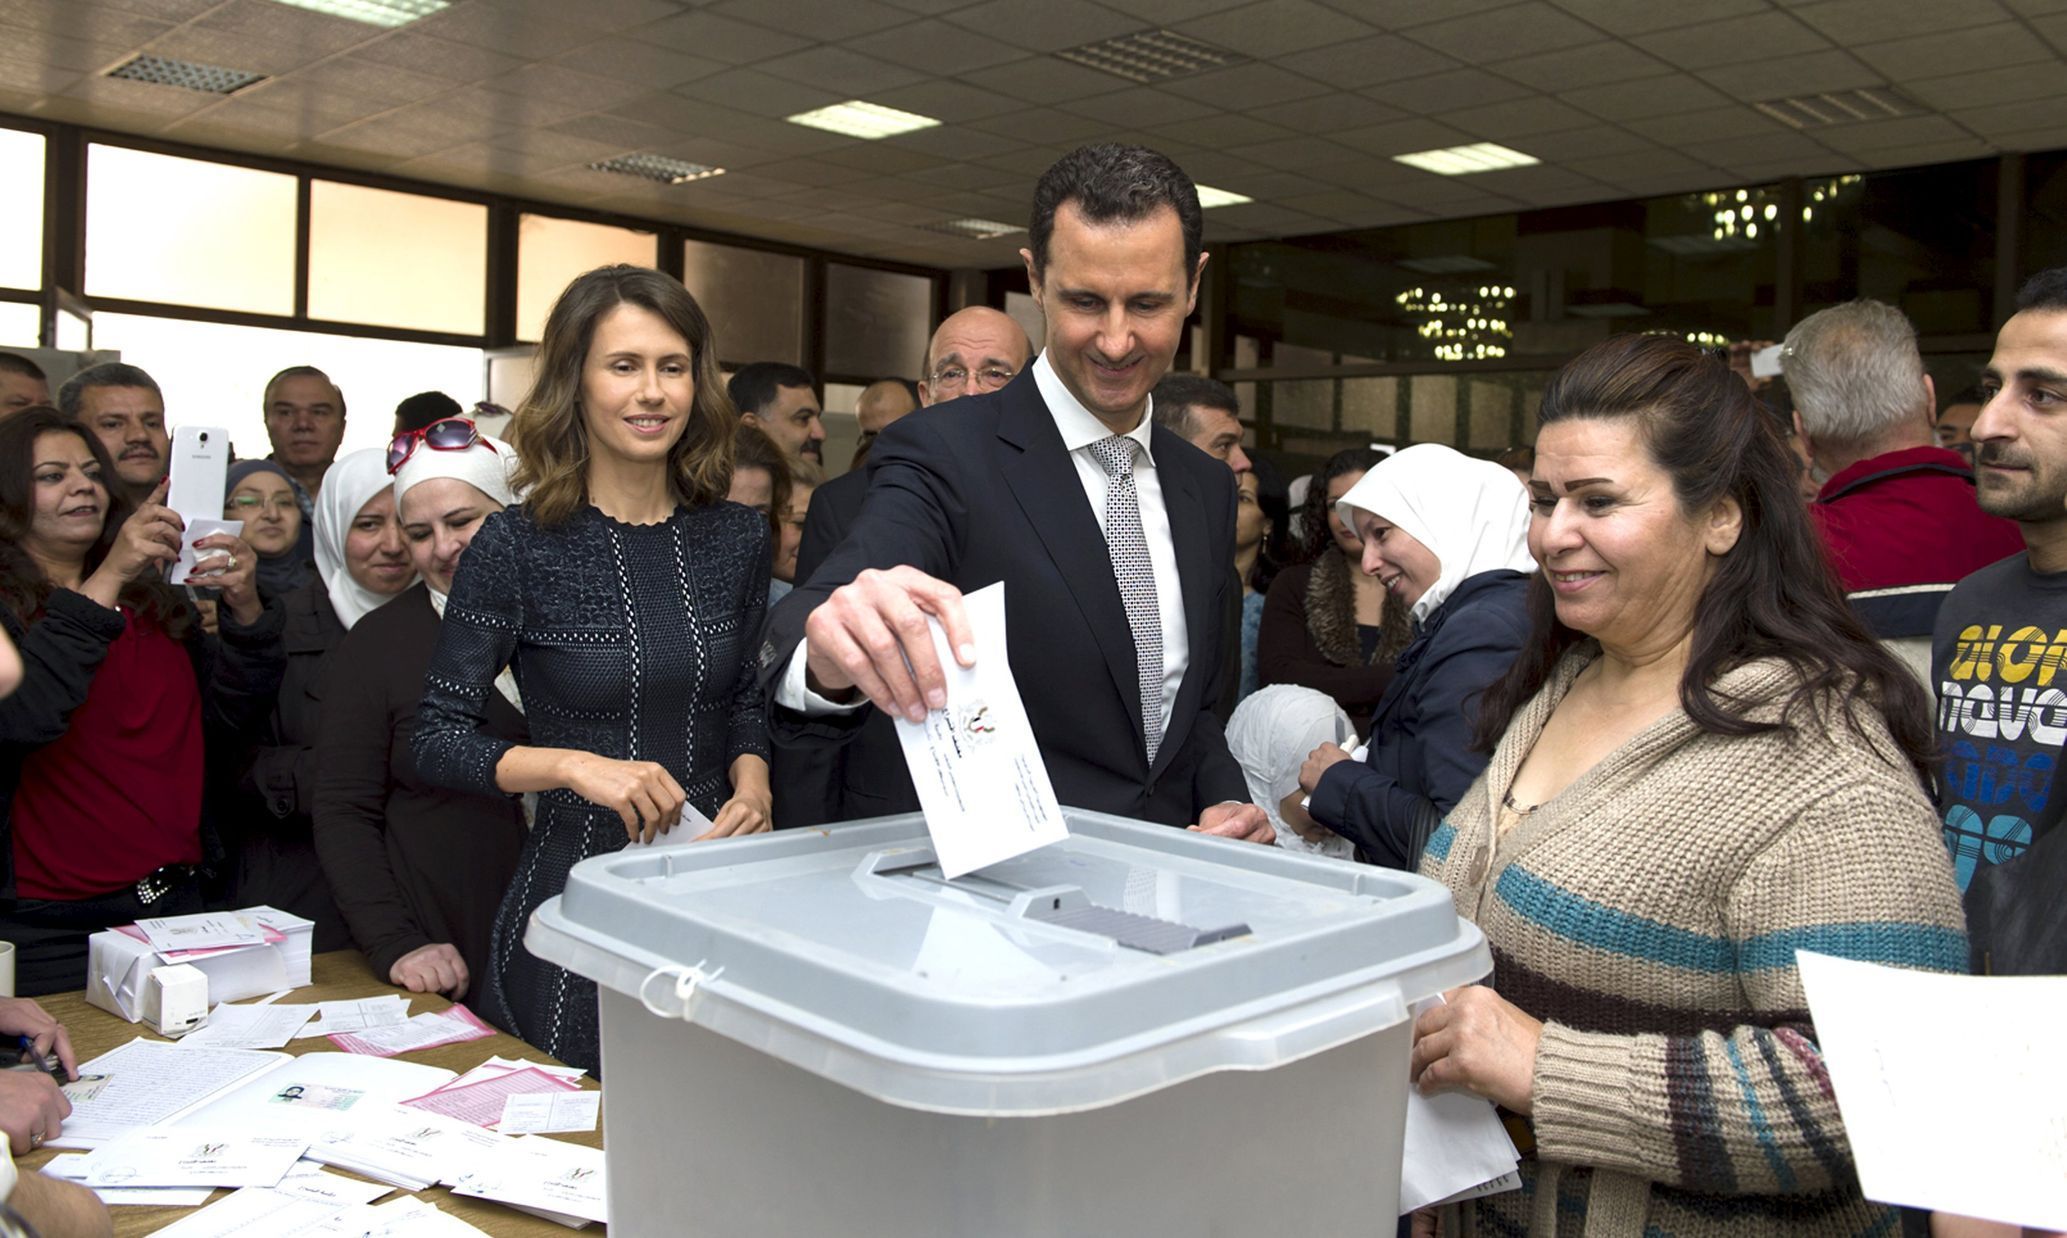 Syria's President Bashar al-Assad casts his vote next to his wife Asma inside a polling station during the parliamentary elections in Damascus